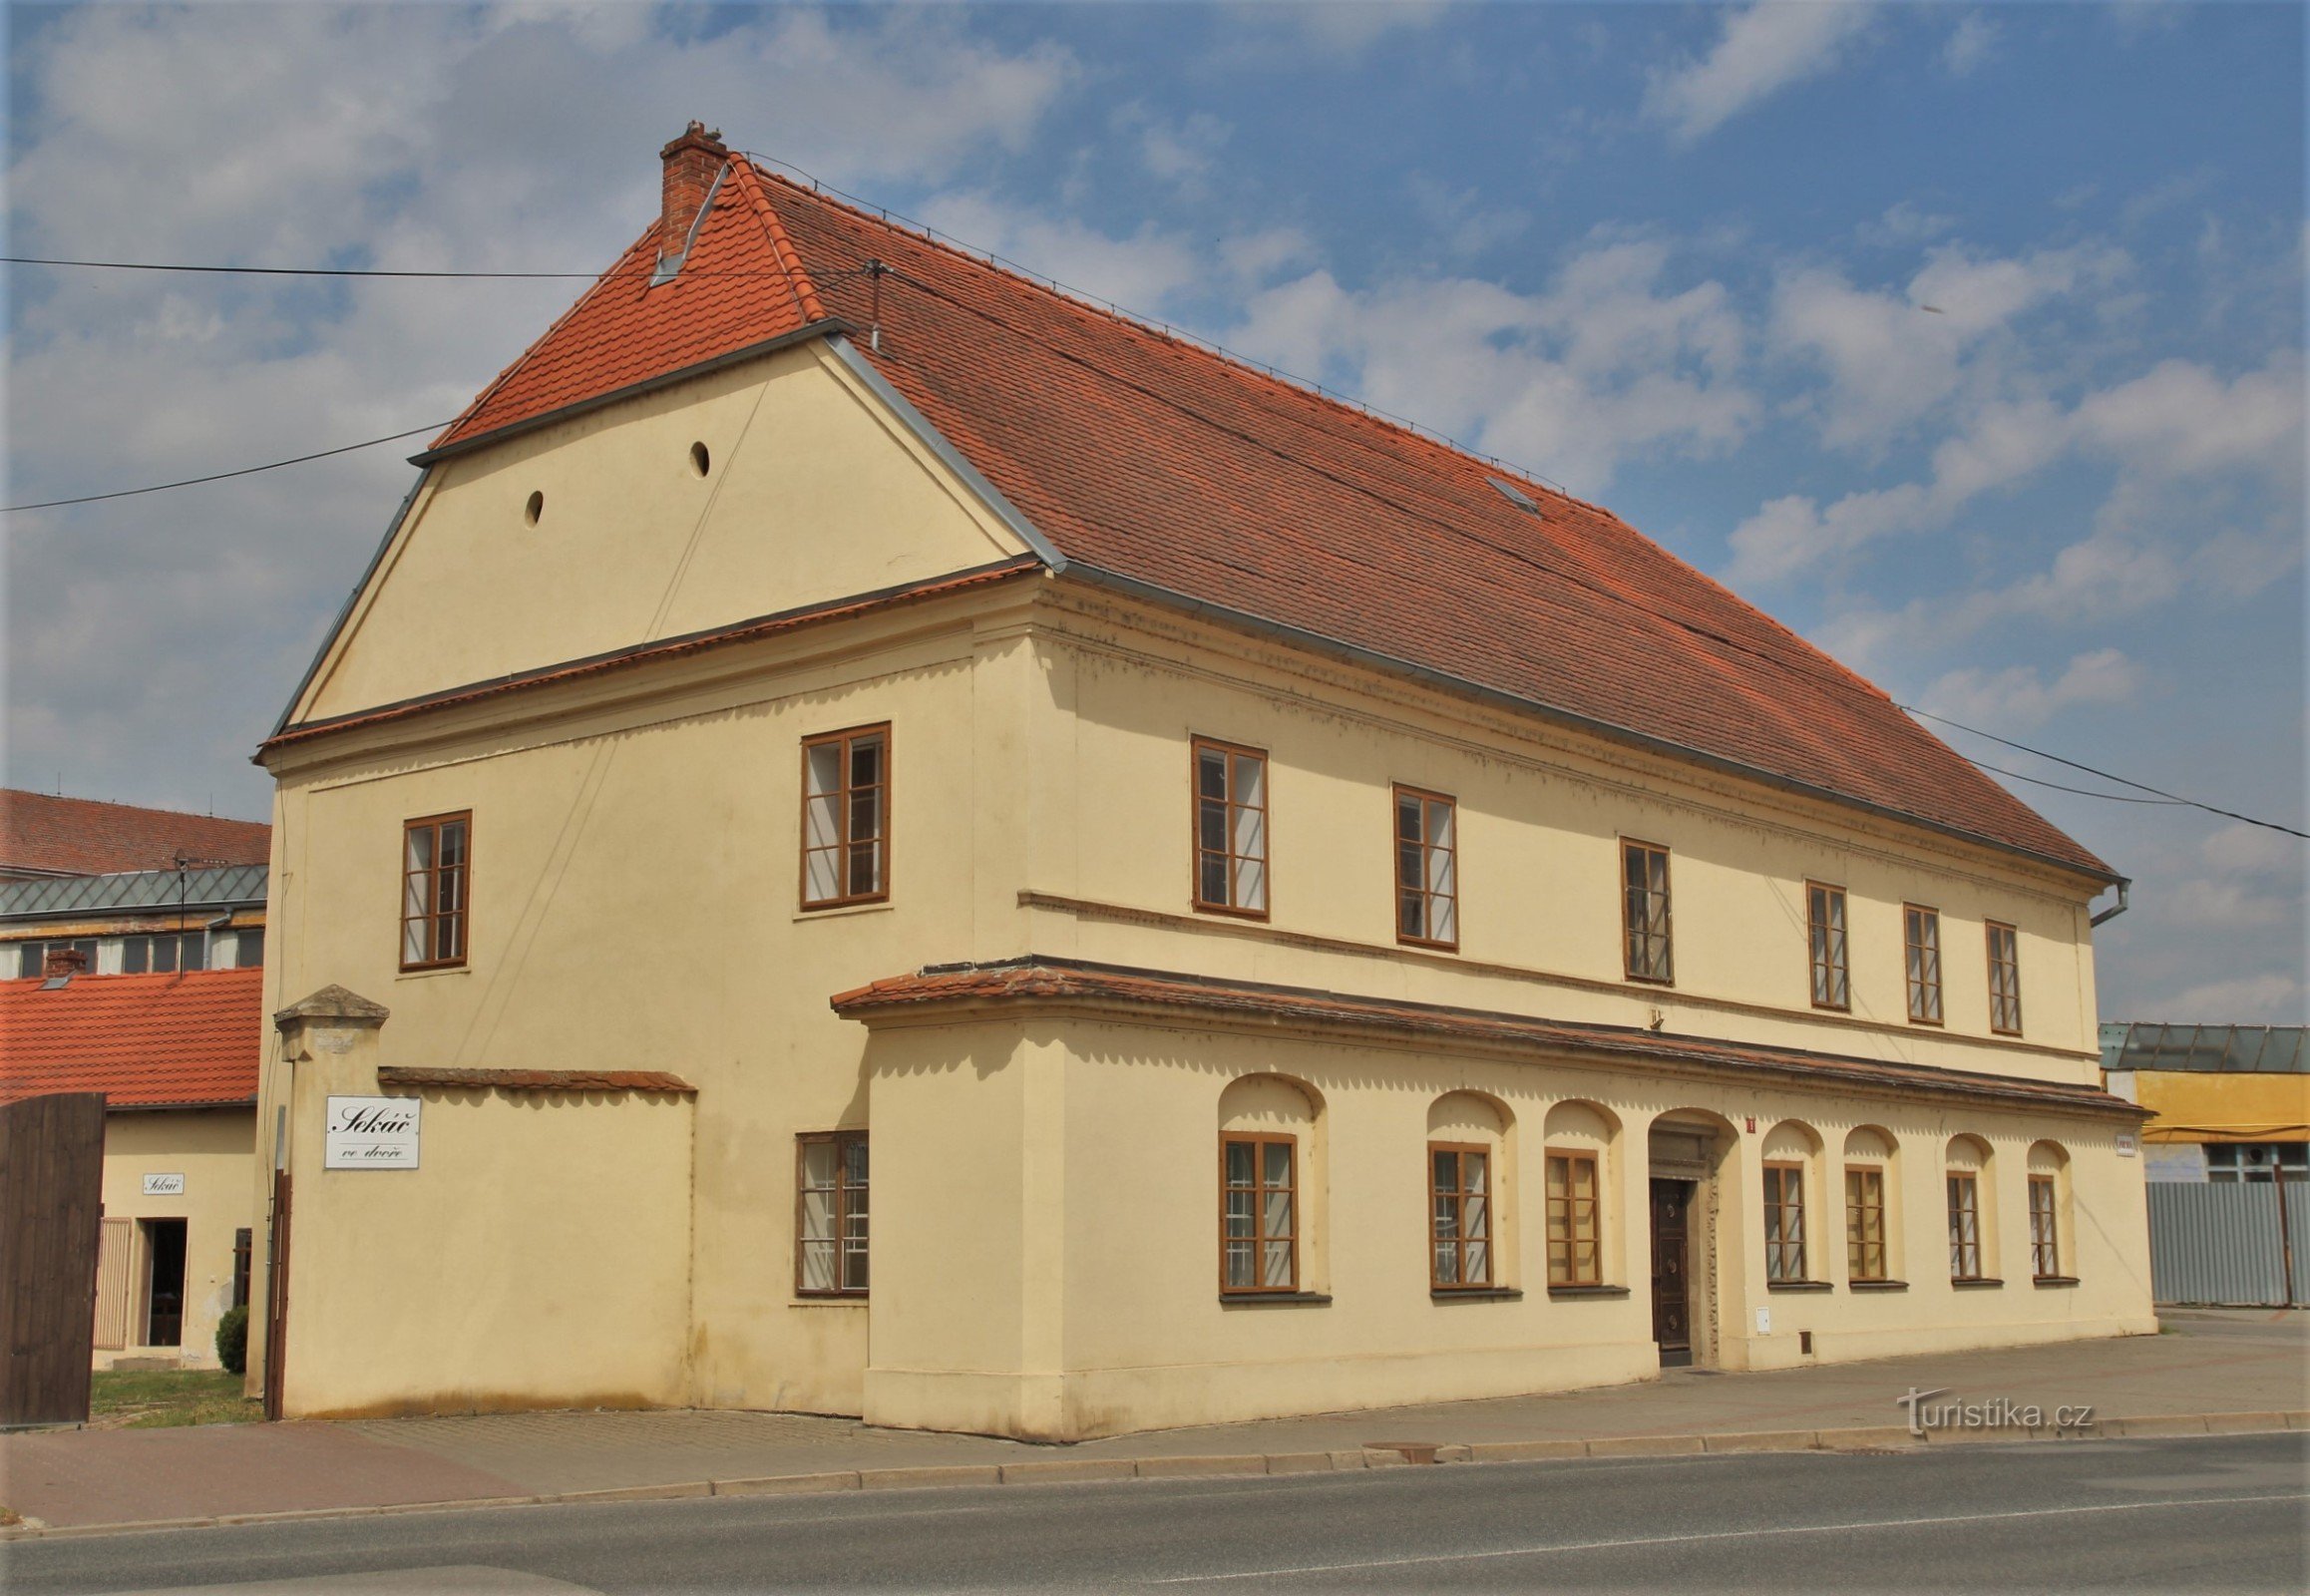 Ivančice - the house of the lords of Náchod